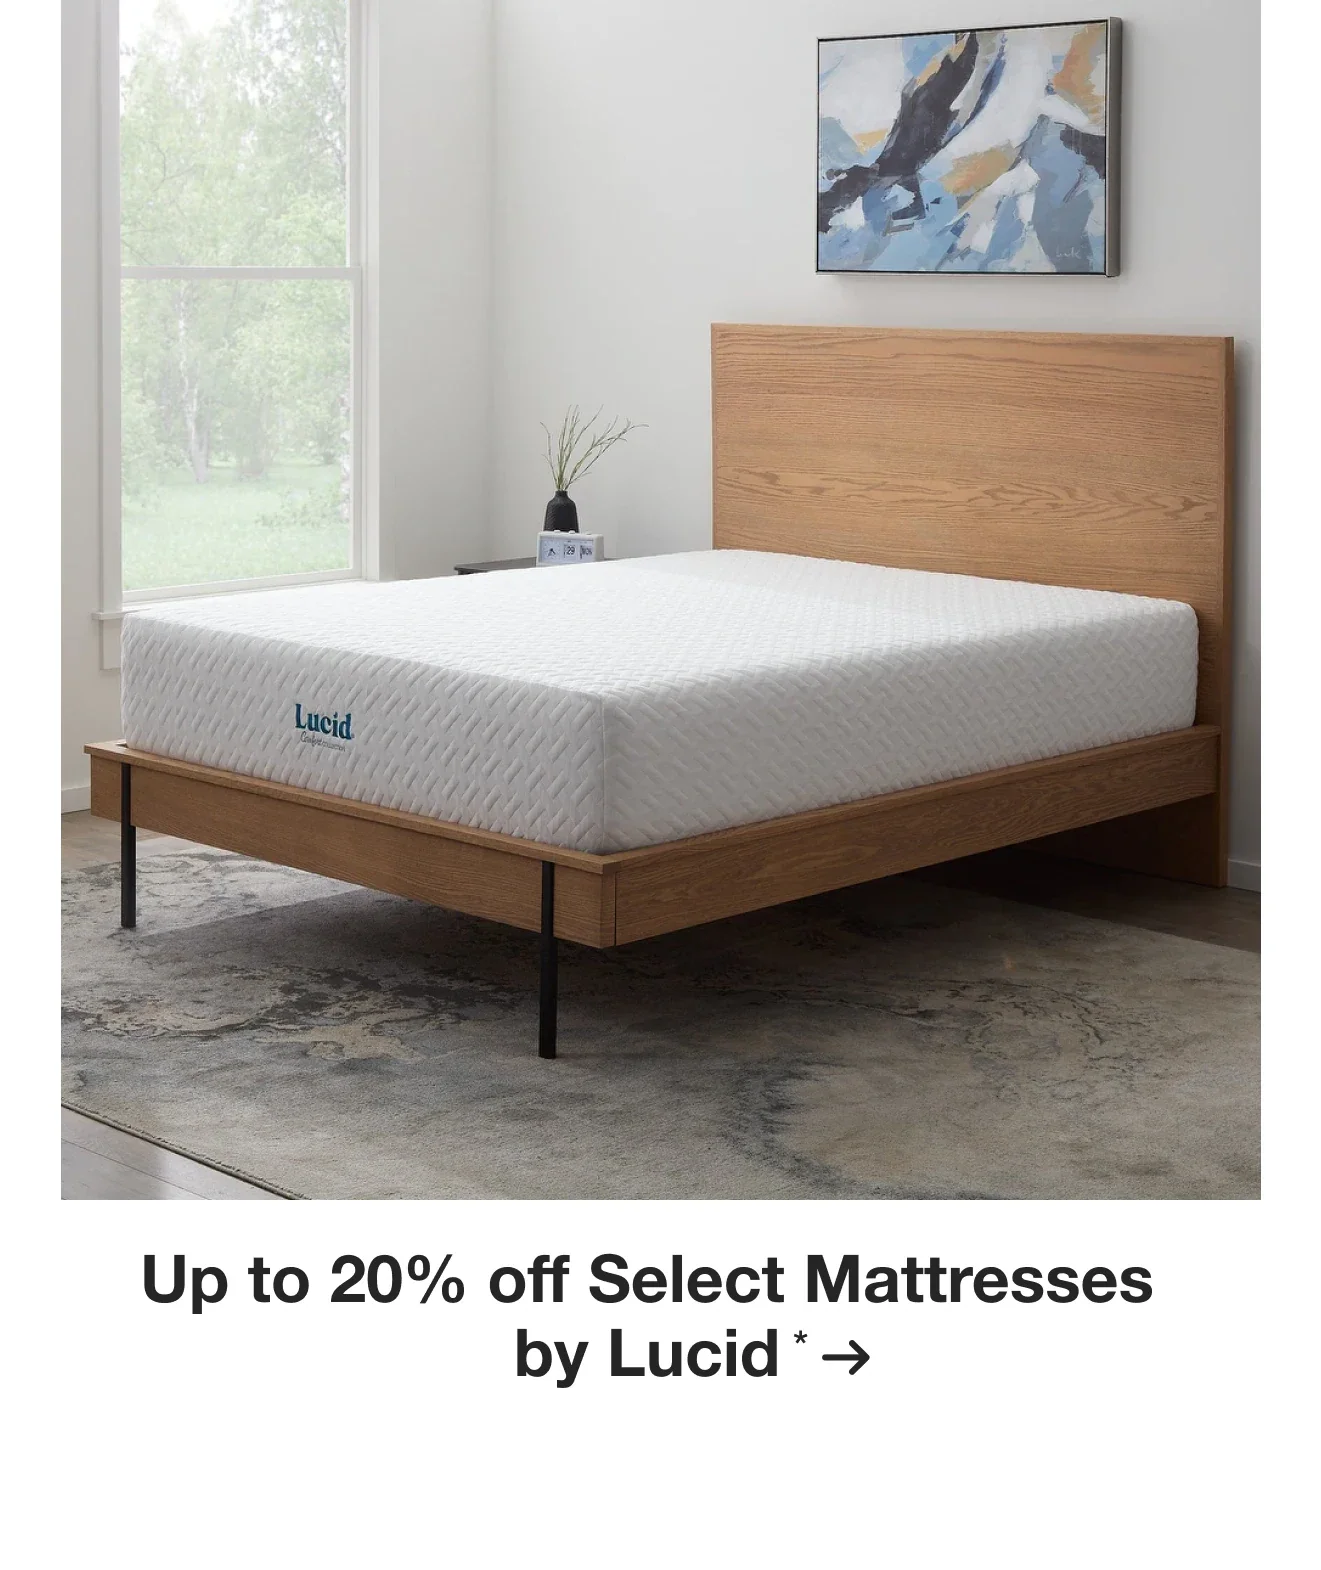 Up to 20% off Select Mattresses by Lucid*